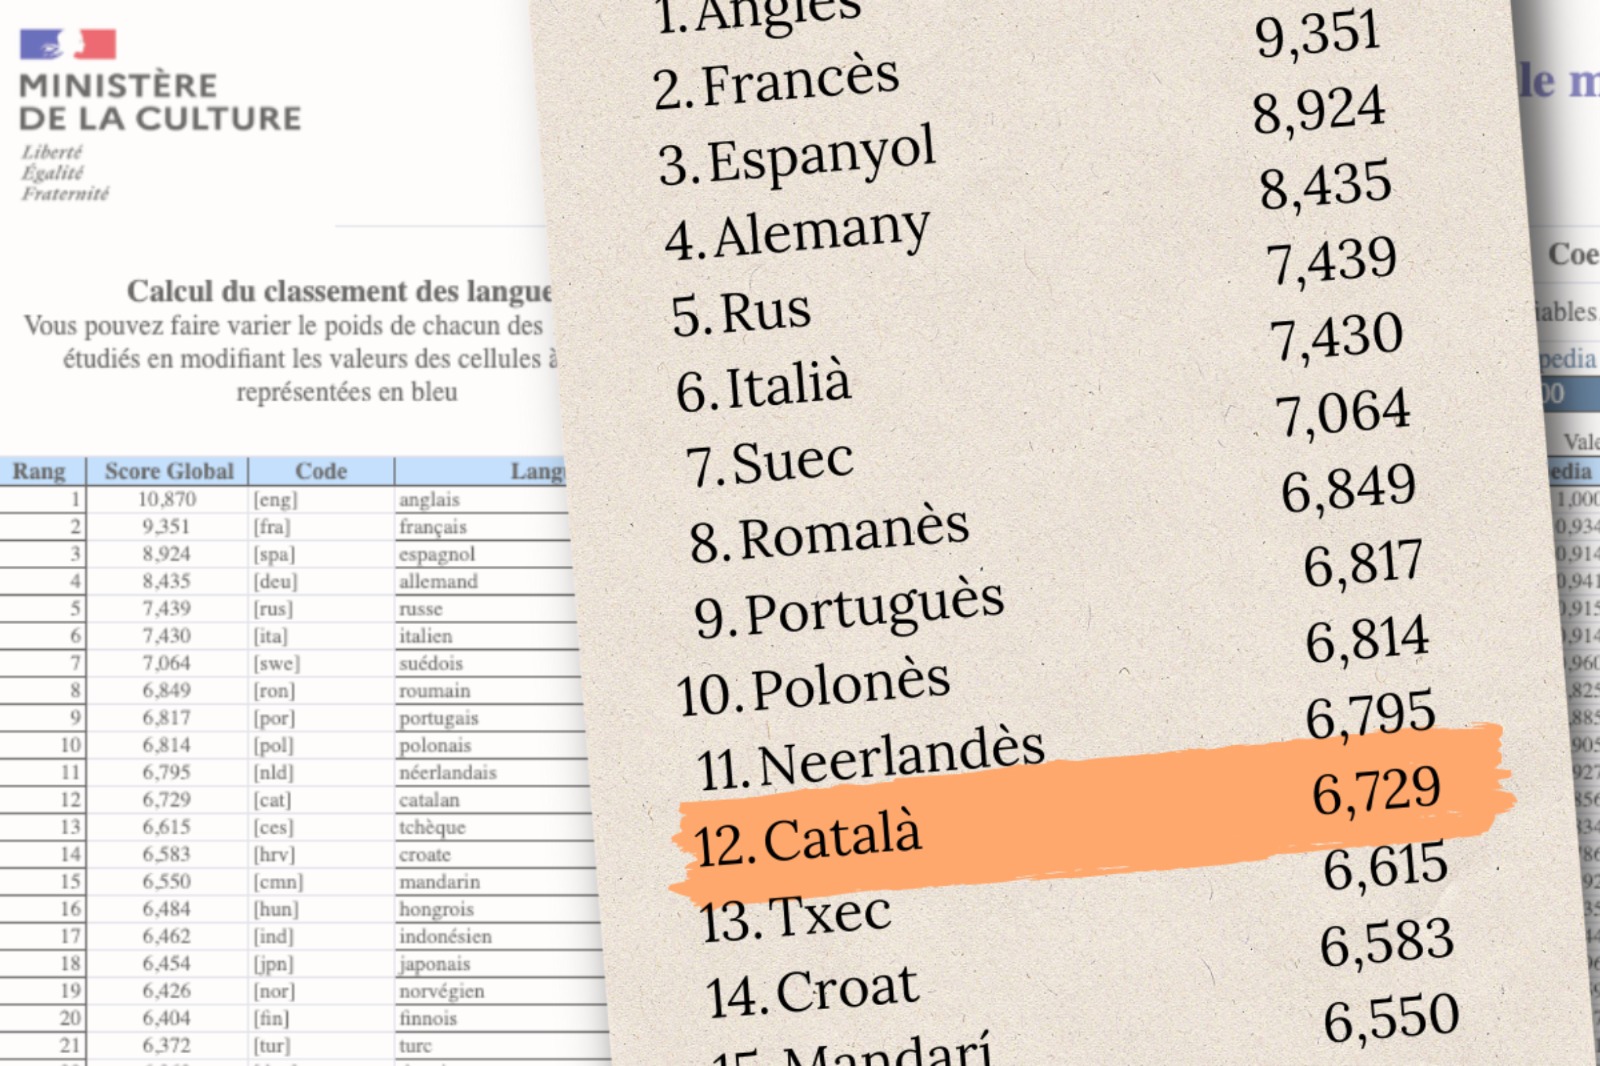 The Catalan Language in the Digital Age